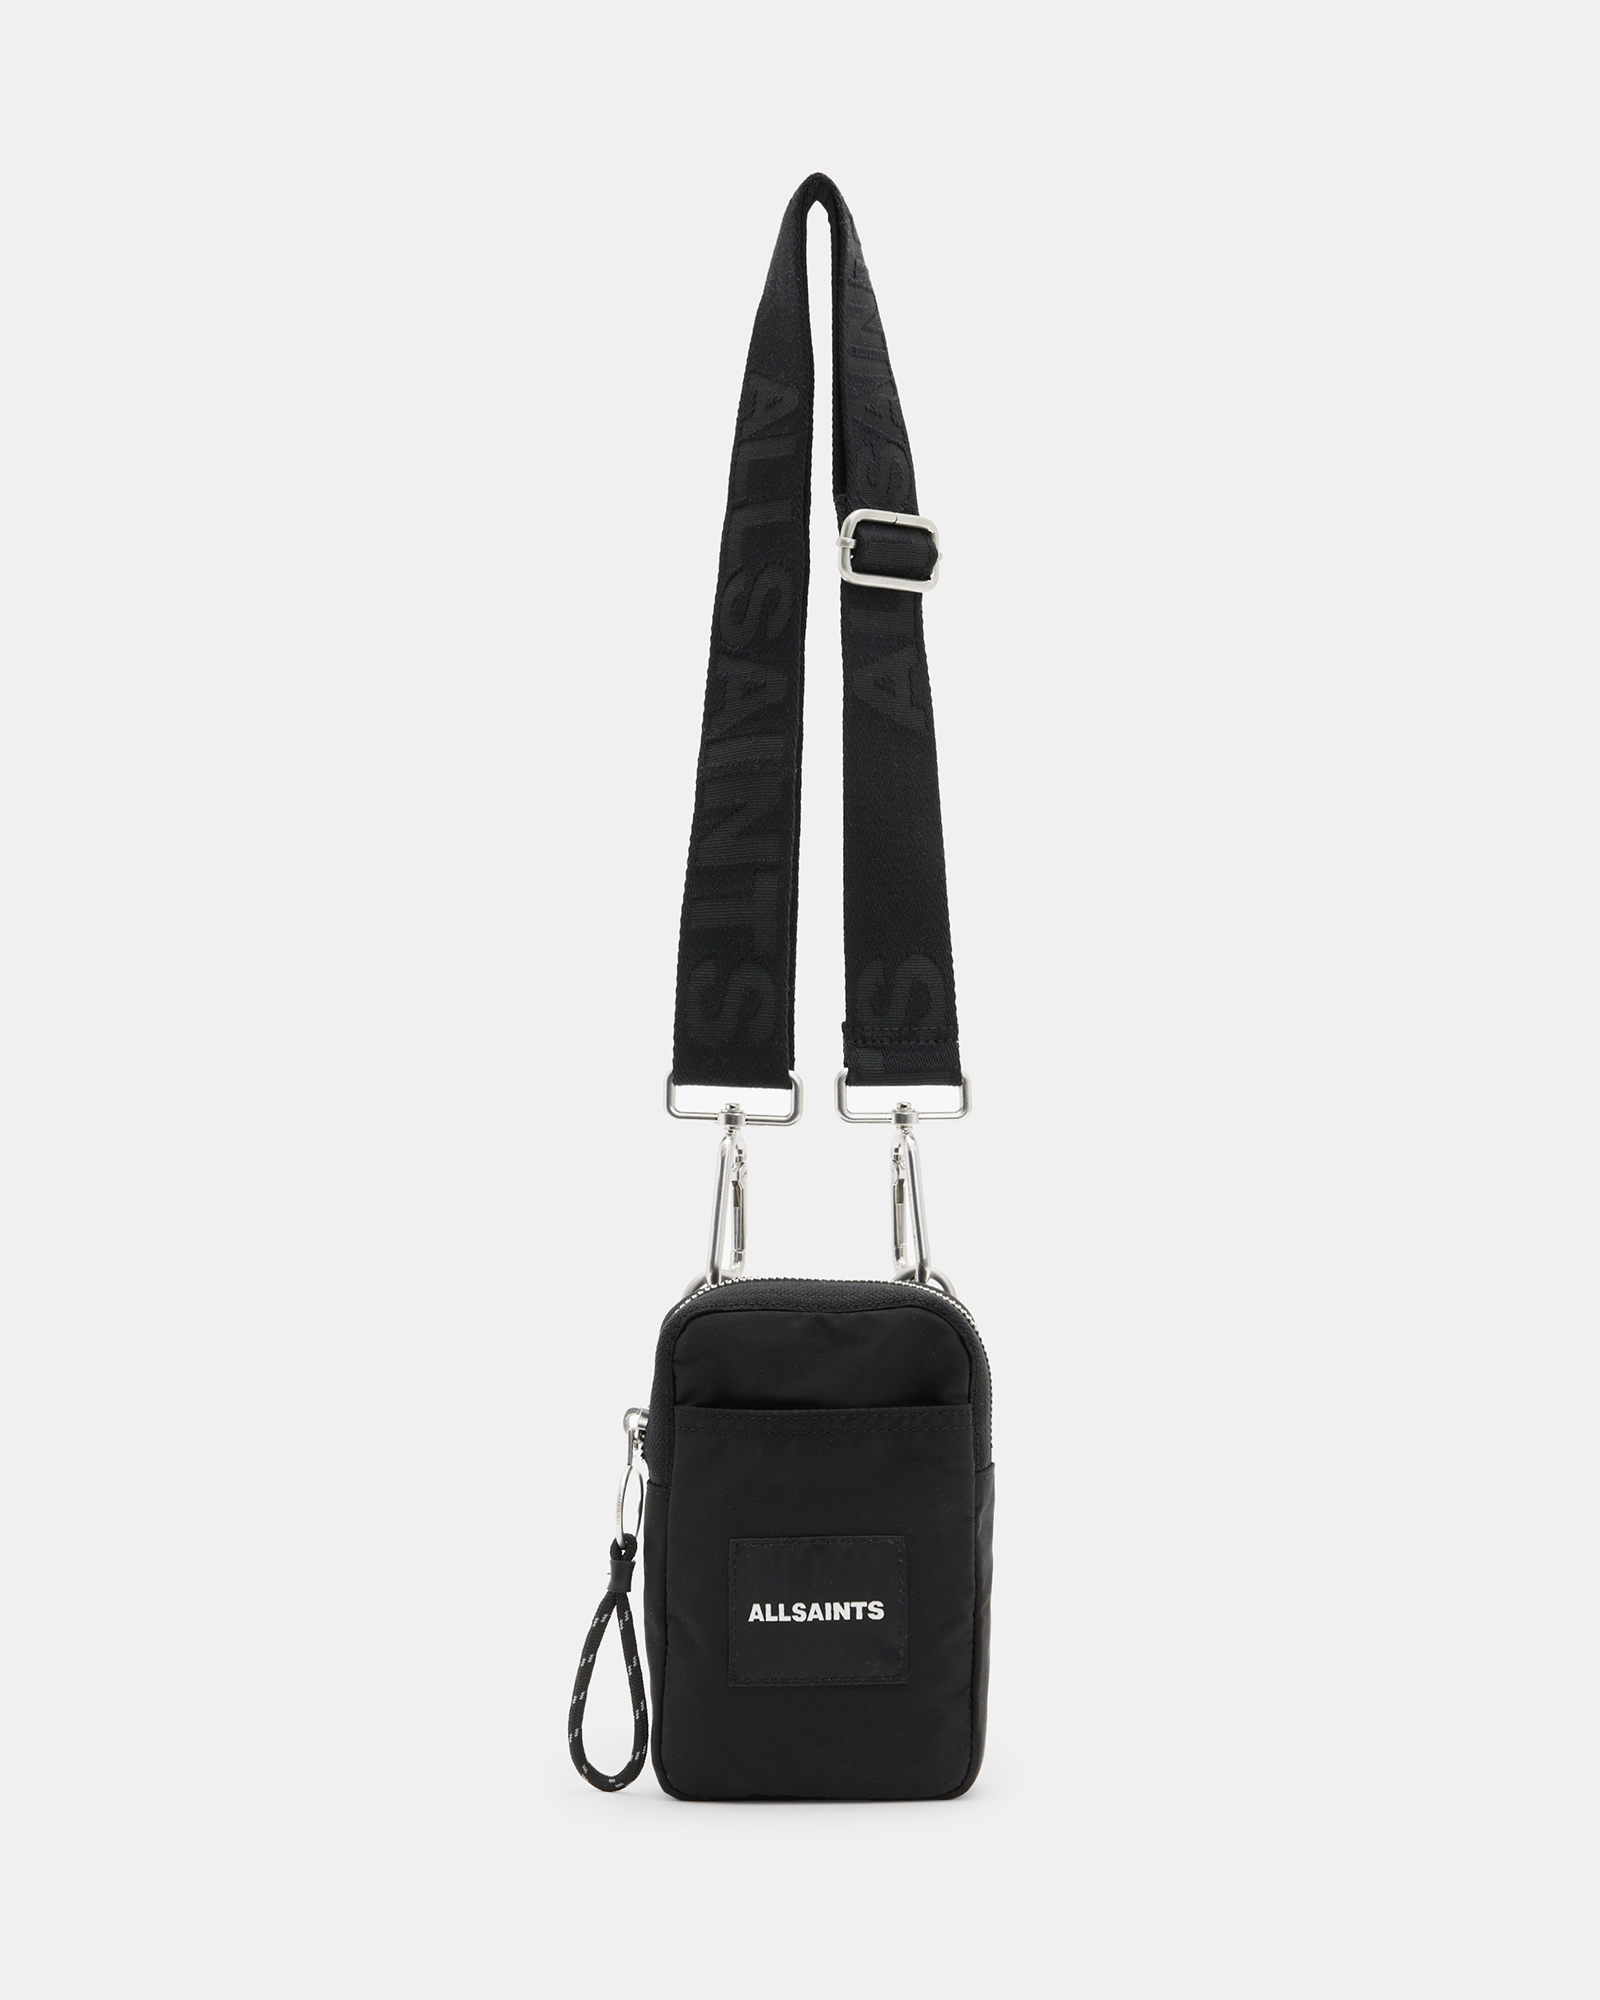 AllSaints Zumo Recycled Phone Pouch,, Black